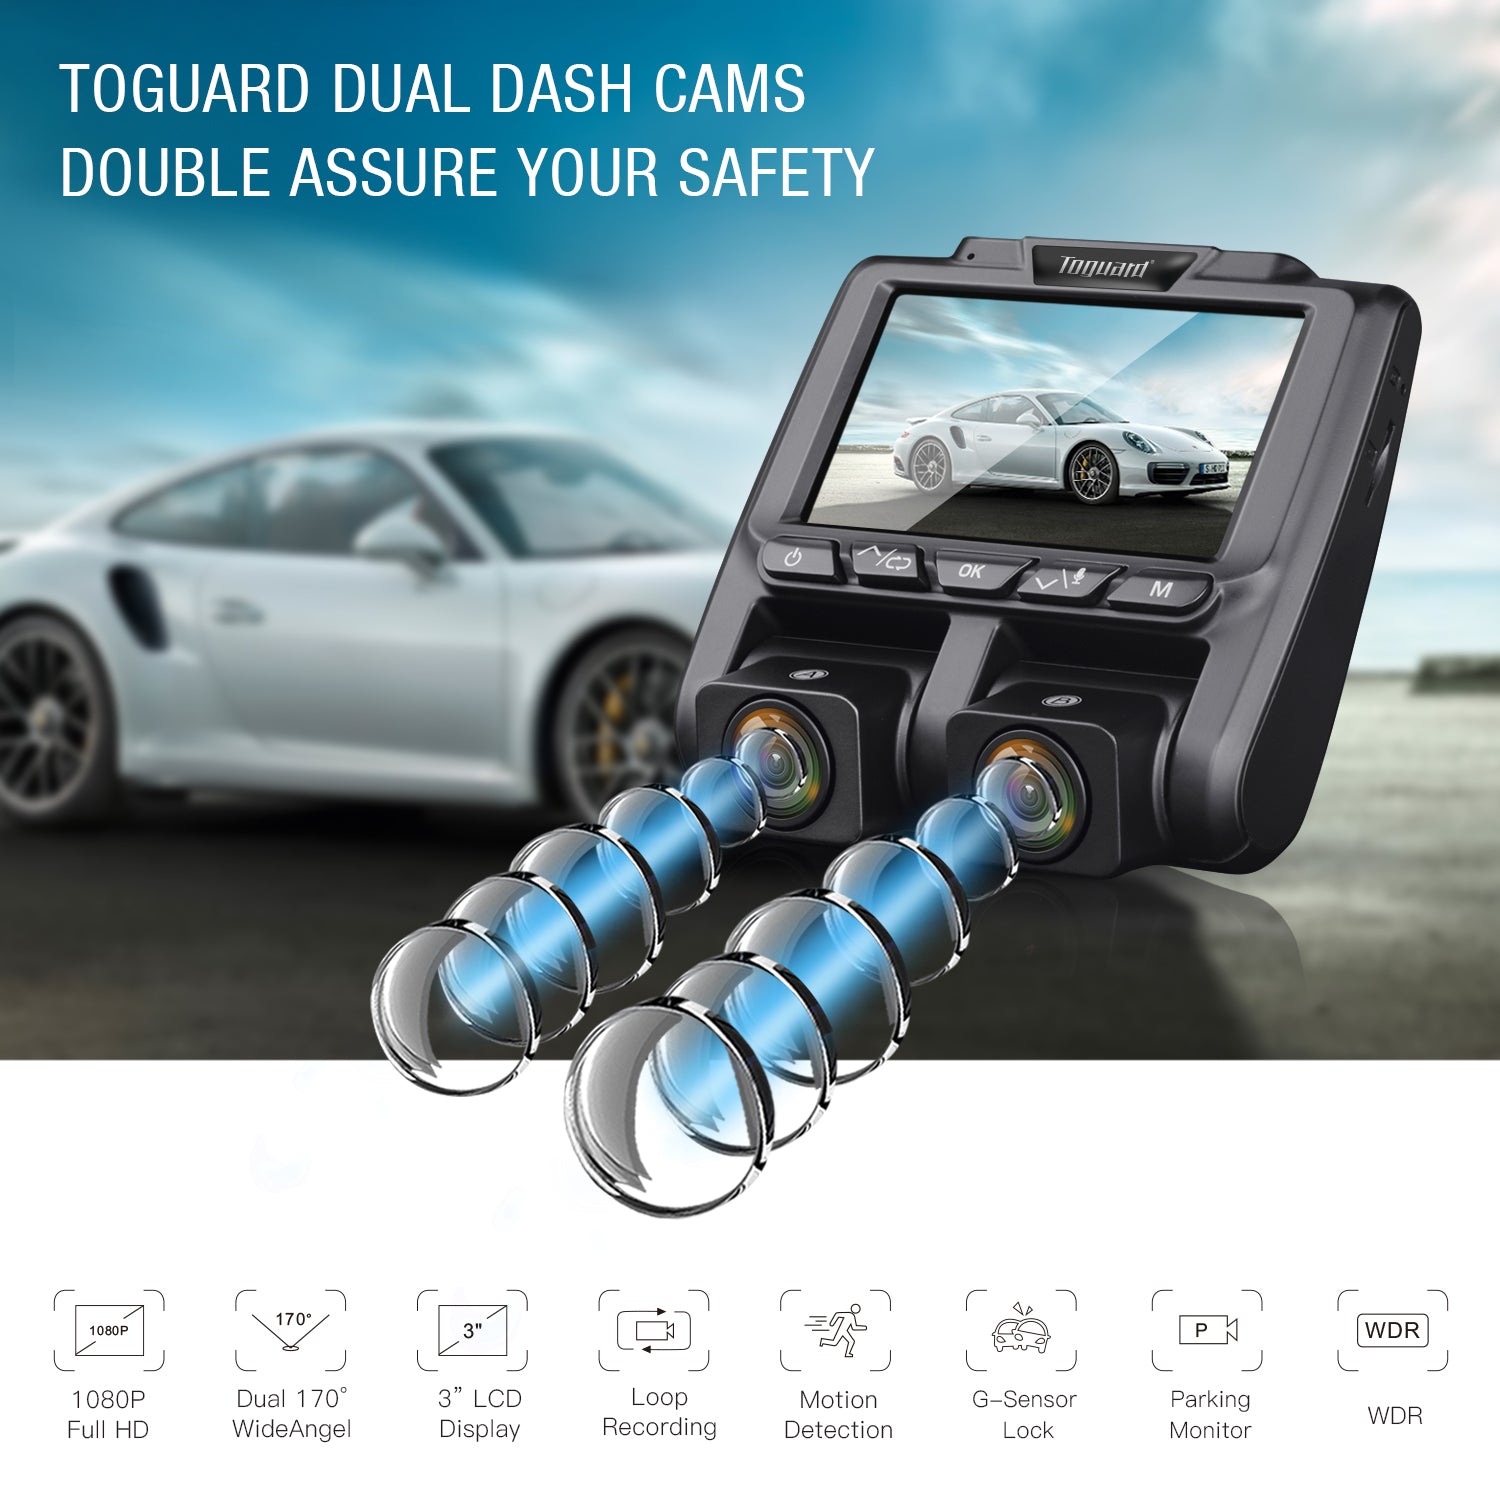 Toguard CE45 Uber Dual Dash Cam Full HD  1080P Inside and Outside Car Camera（Out of stock in Canada）